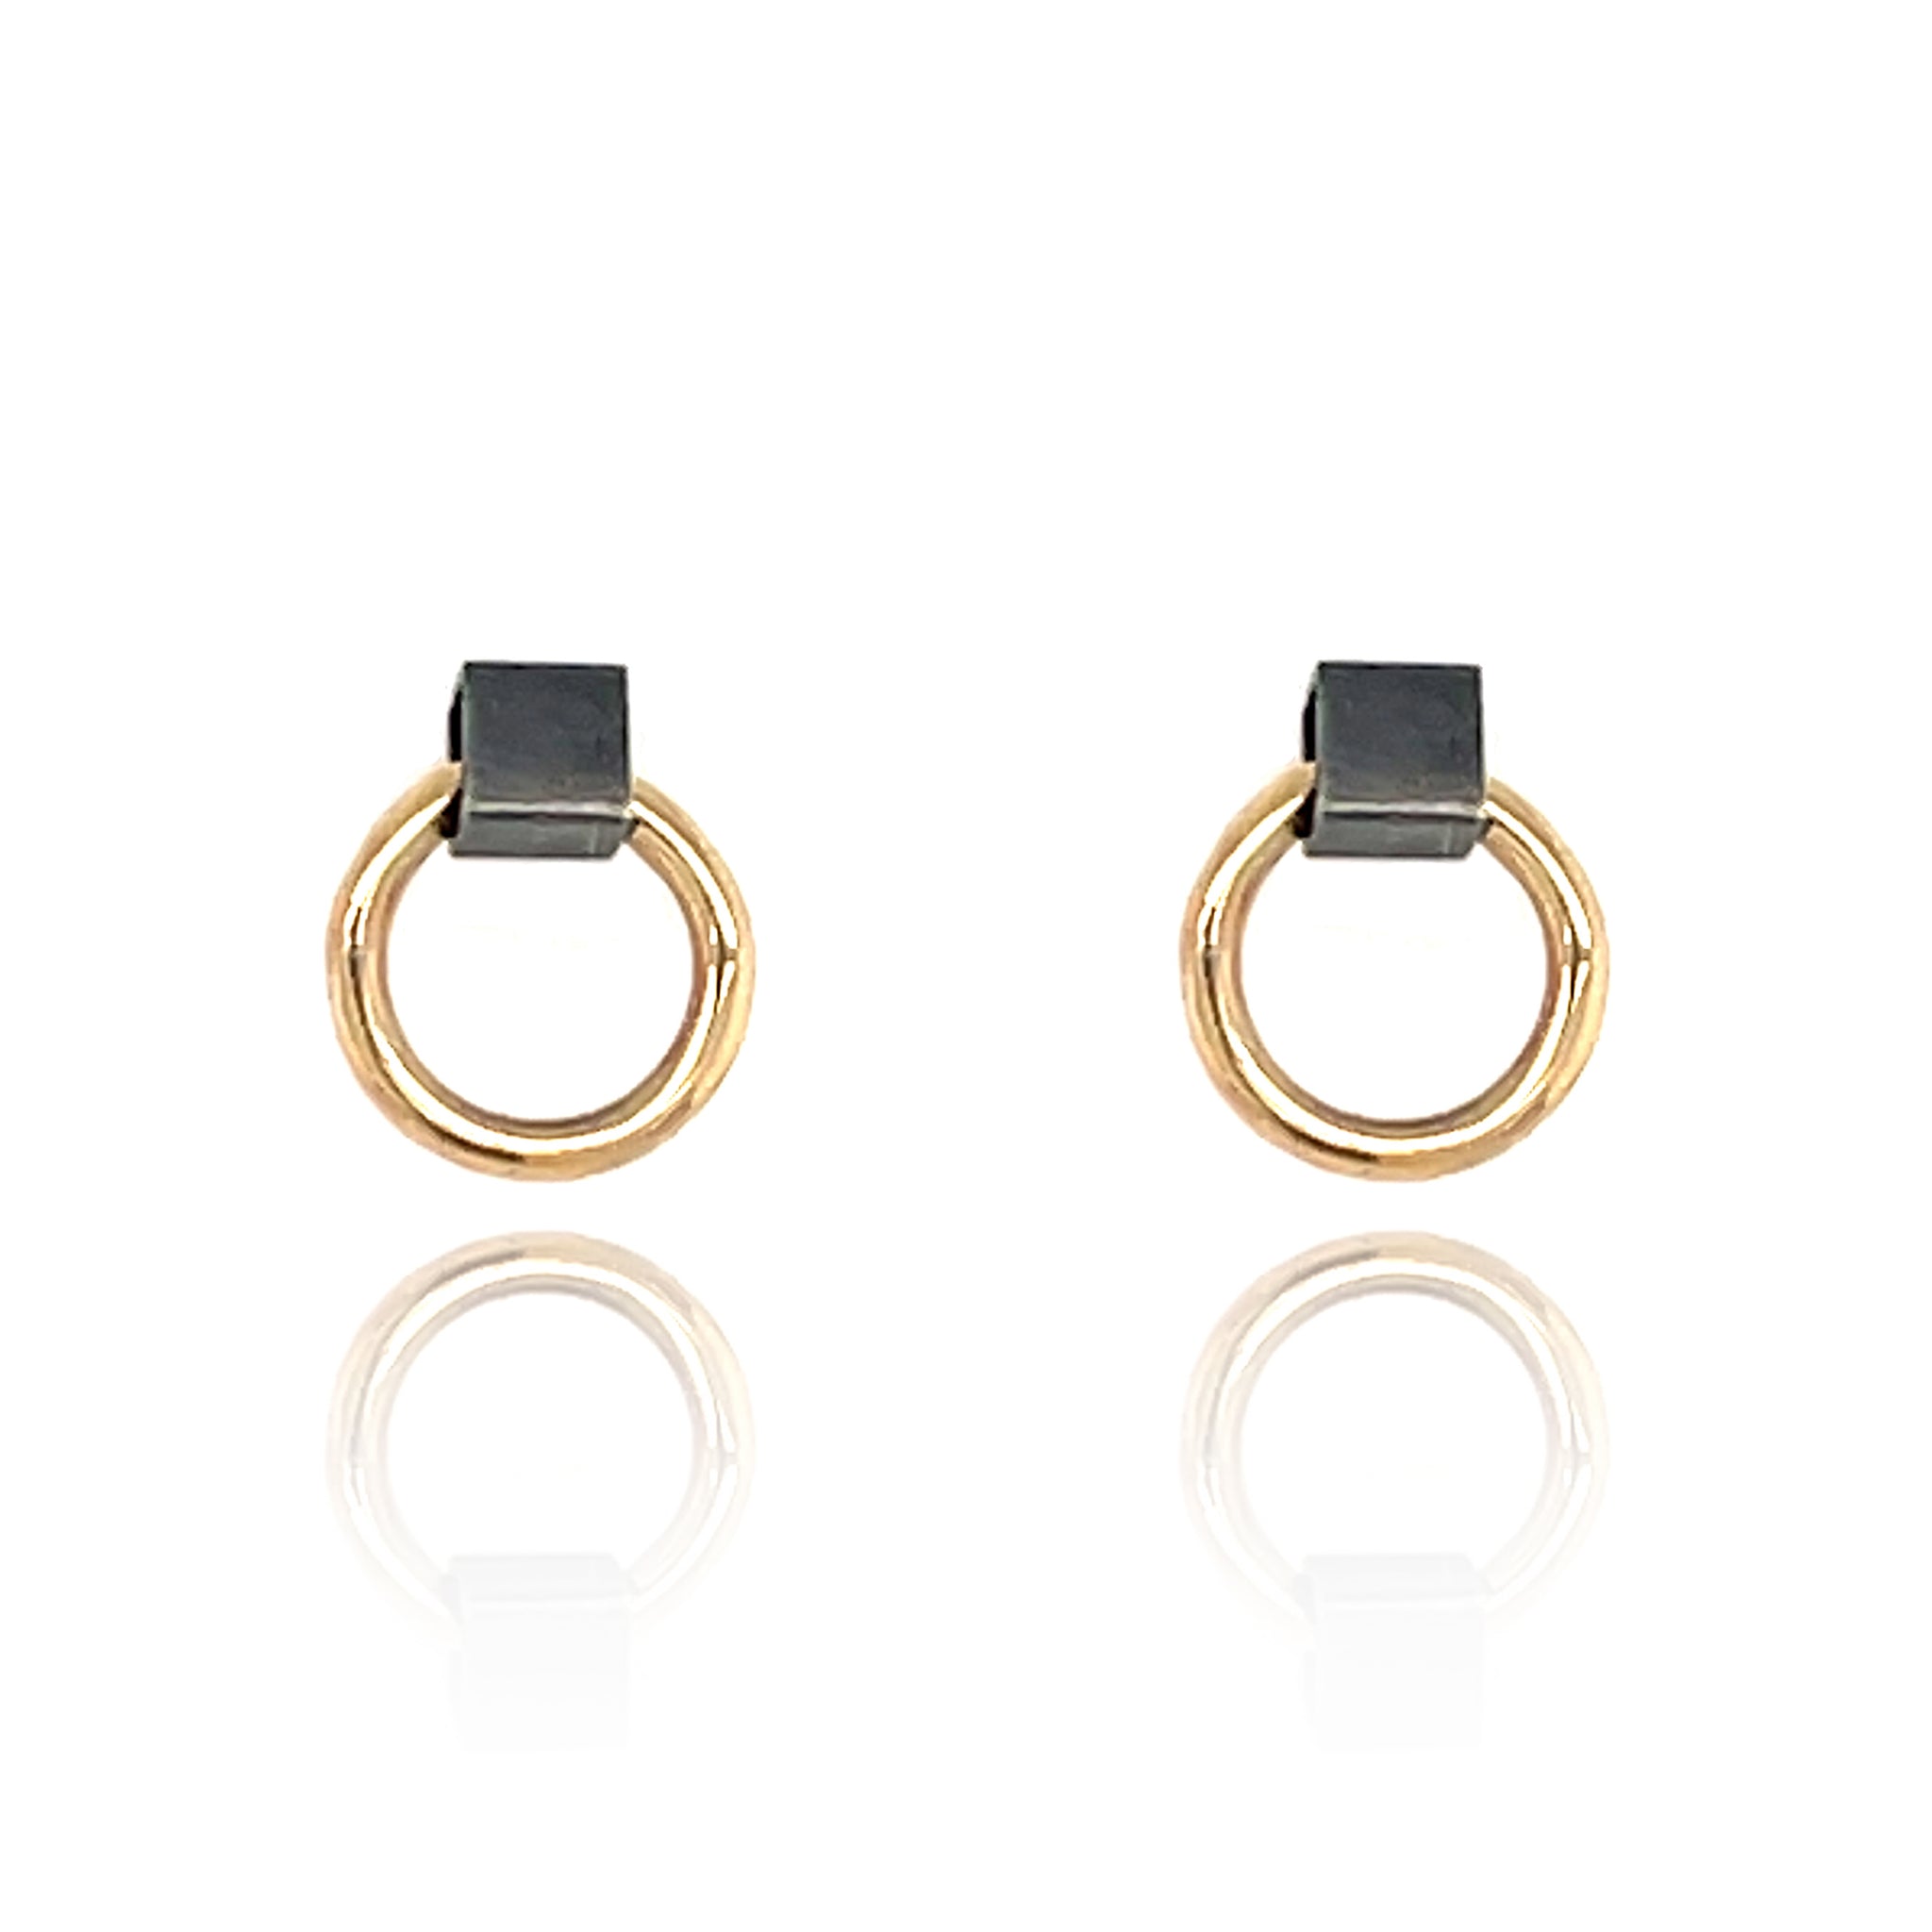 Mini City Earrings in Gold and Black Silver